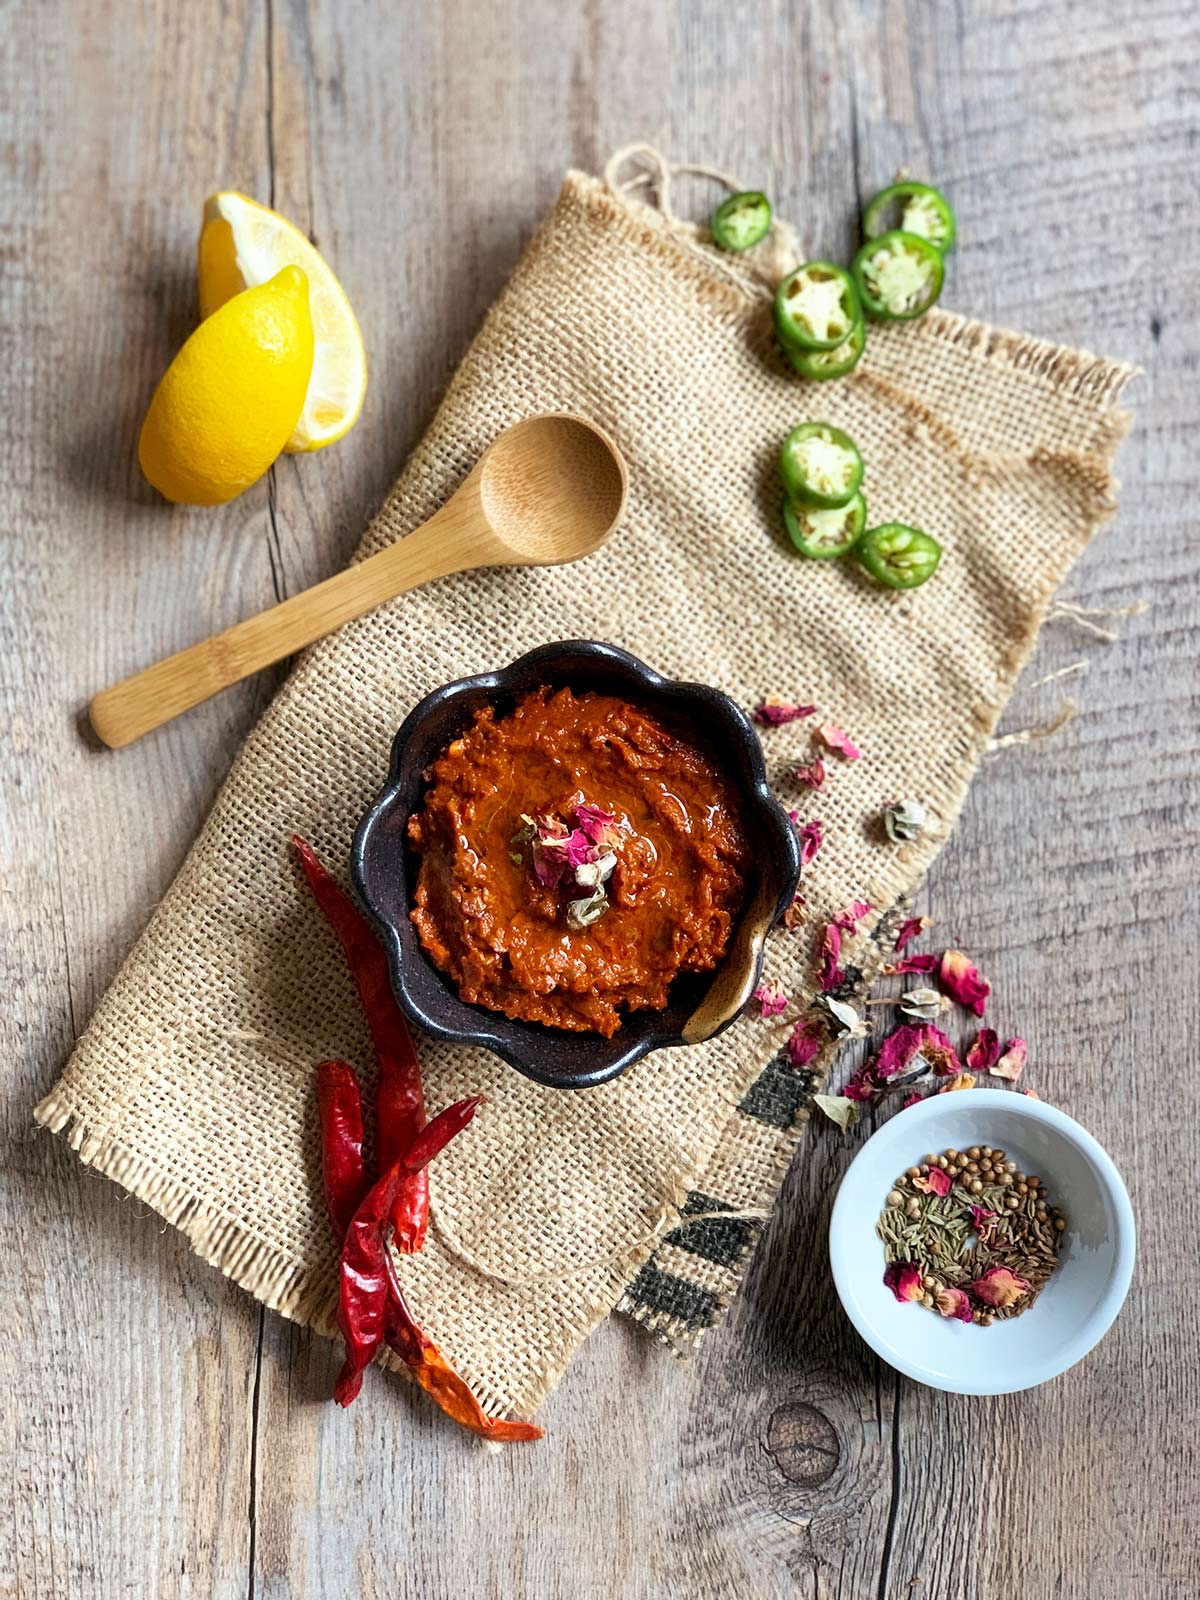 Rose harissa beauty shot on burlap with ingredients surrounding a brown bowl.